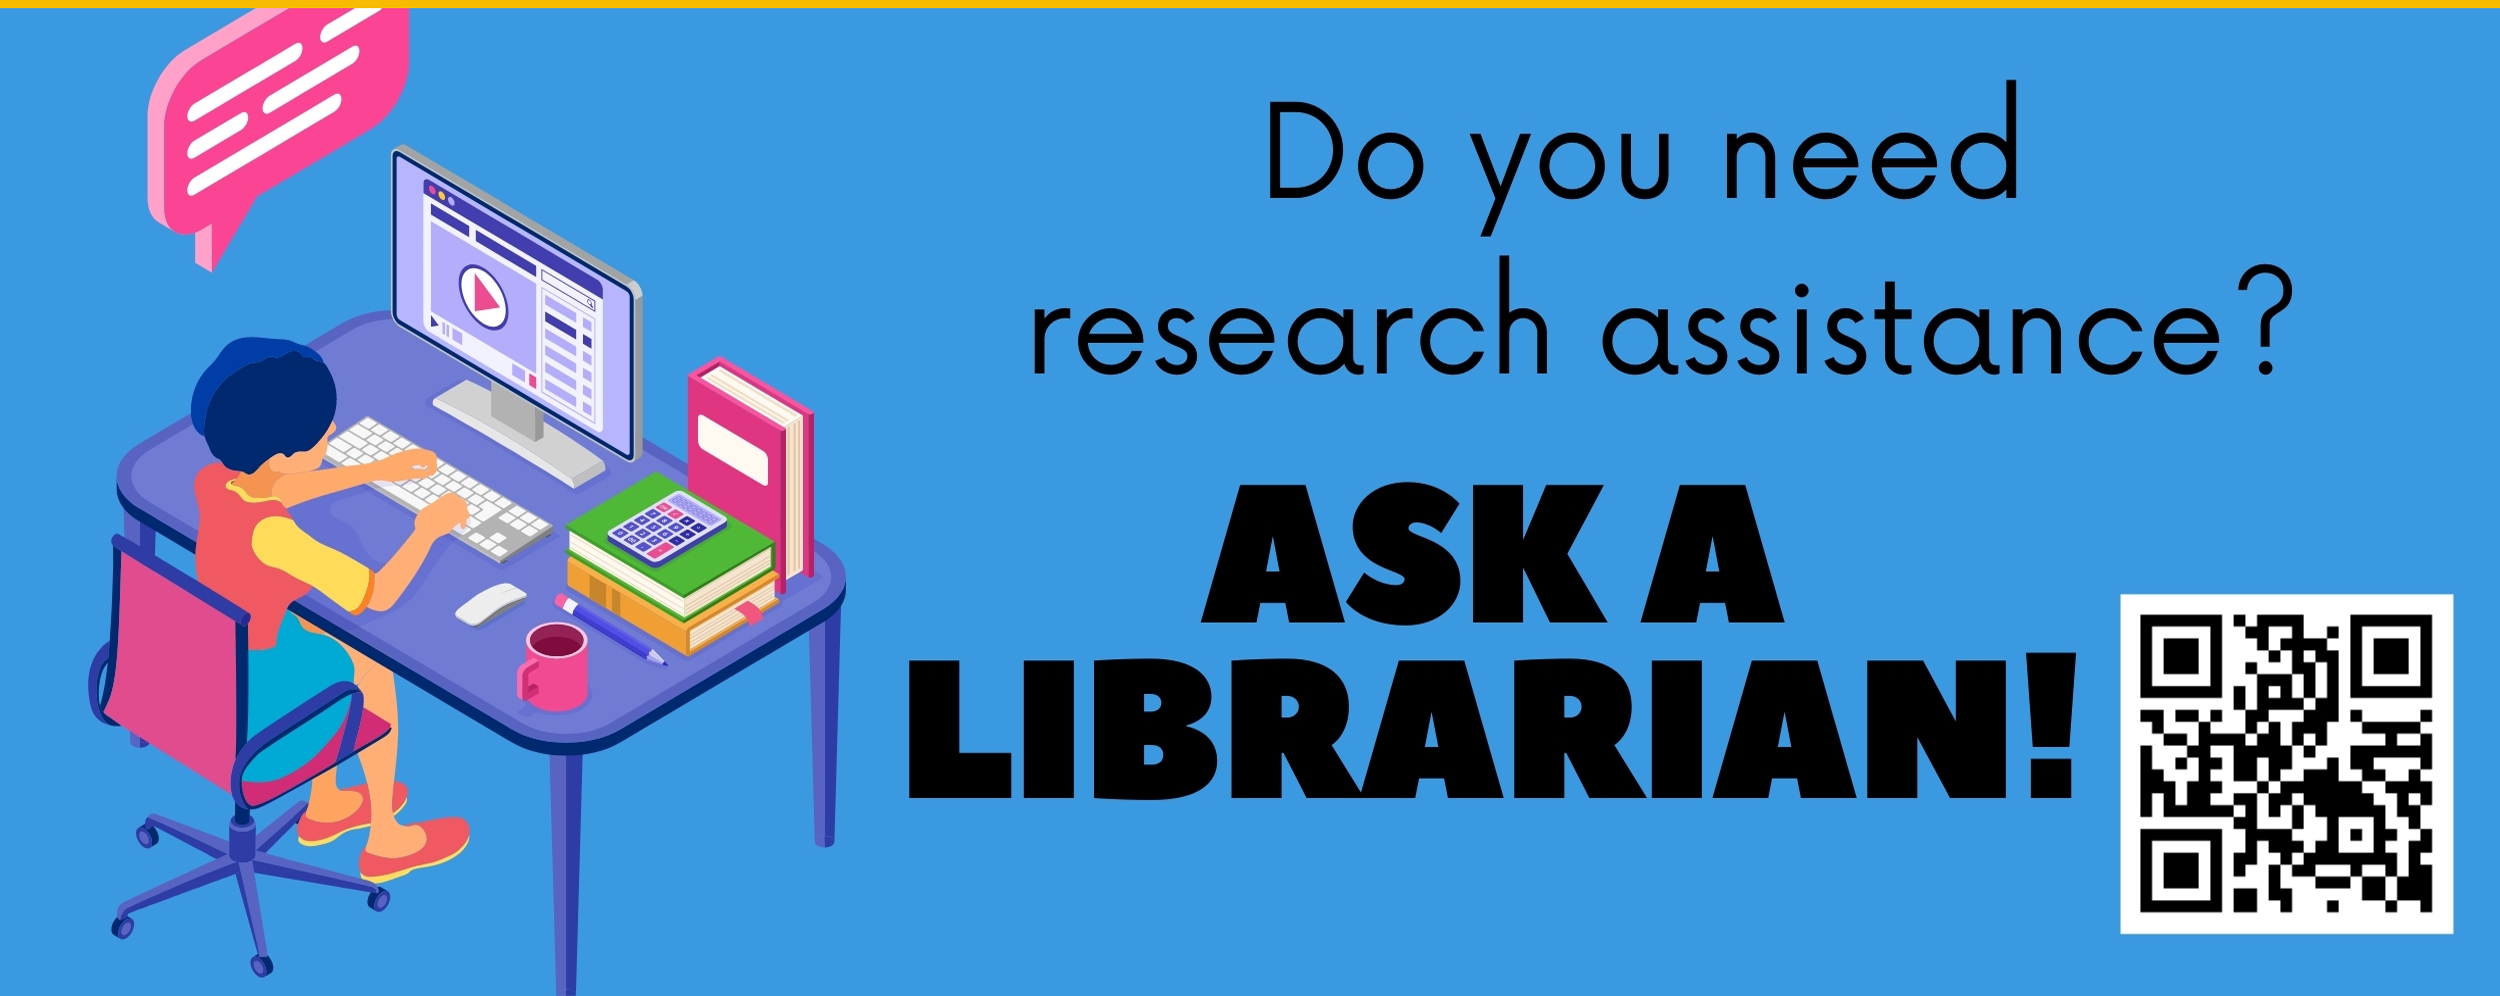 Do you need research assistance?